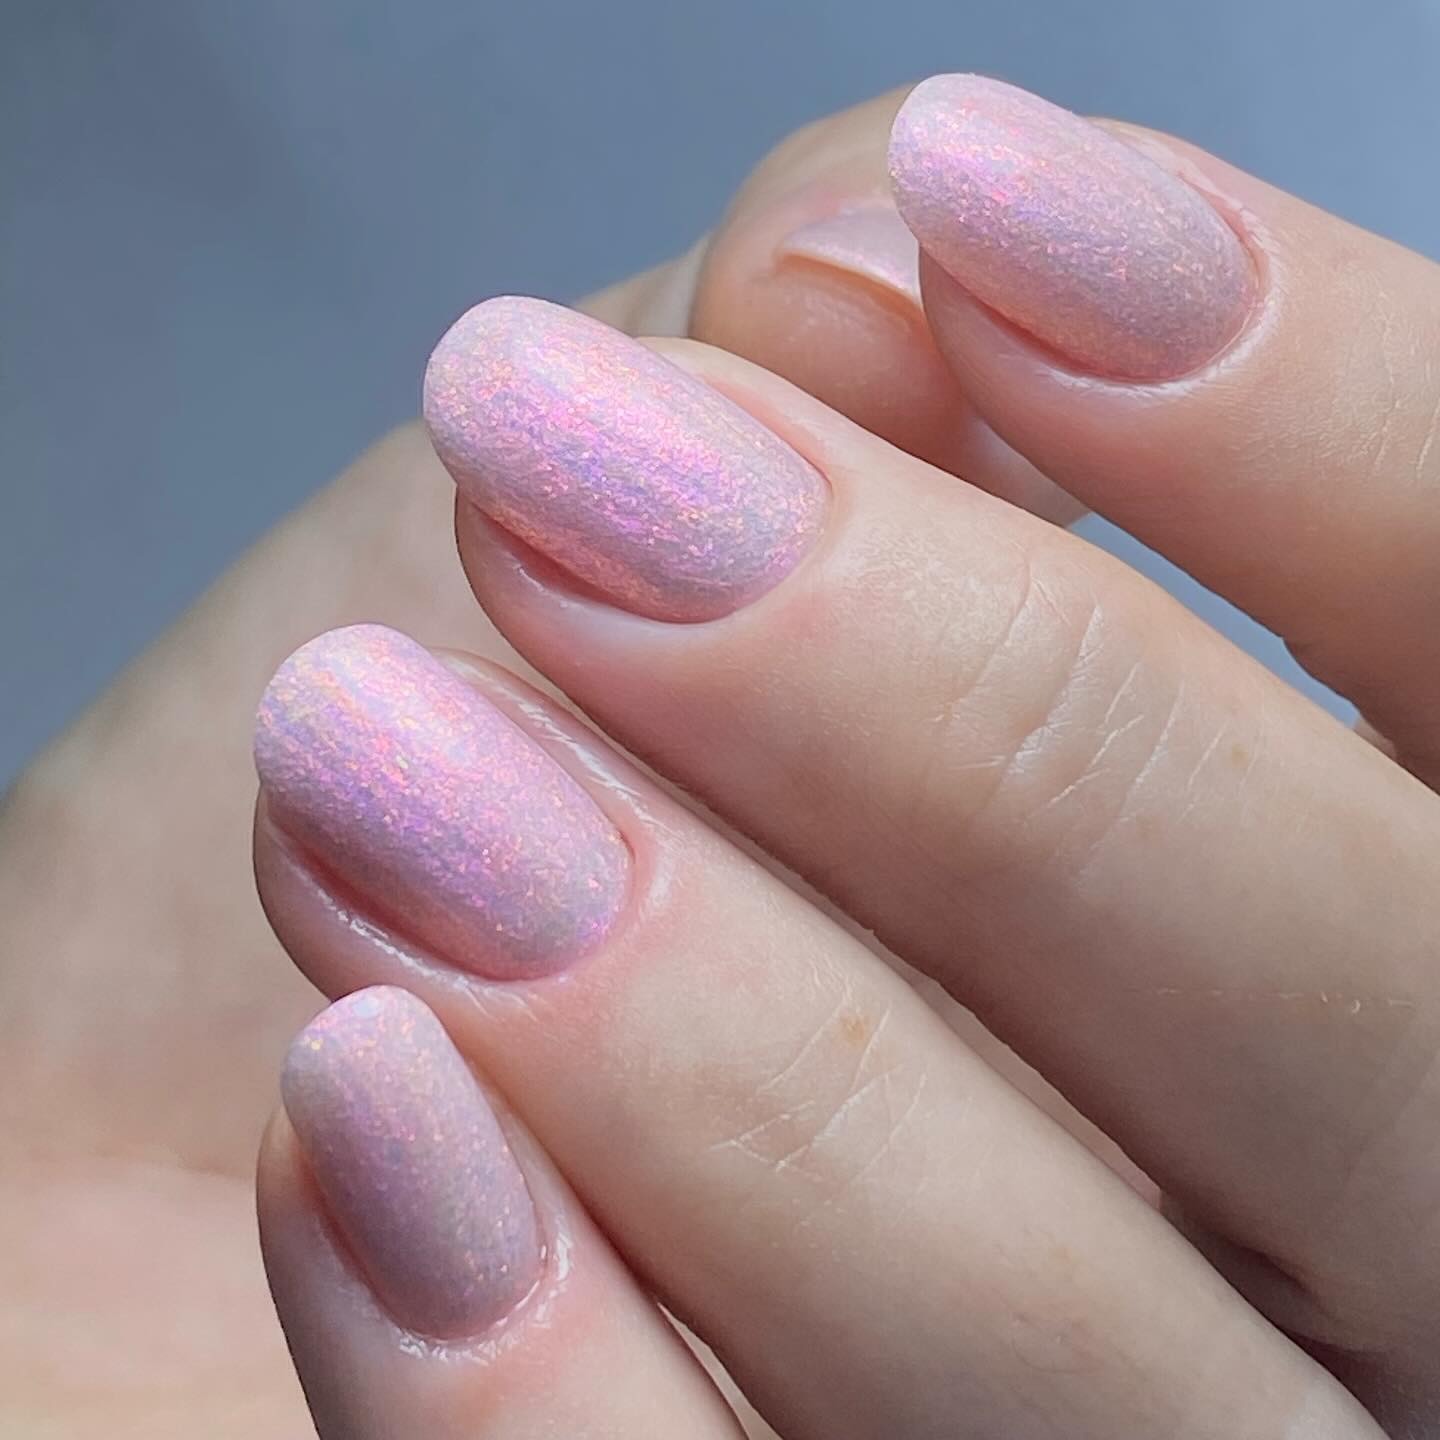 100 Pretty Spring Nail Designs To Try This Year images 72